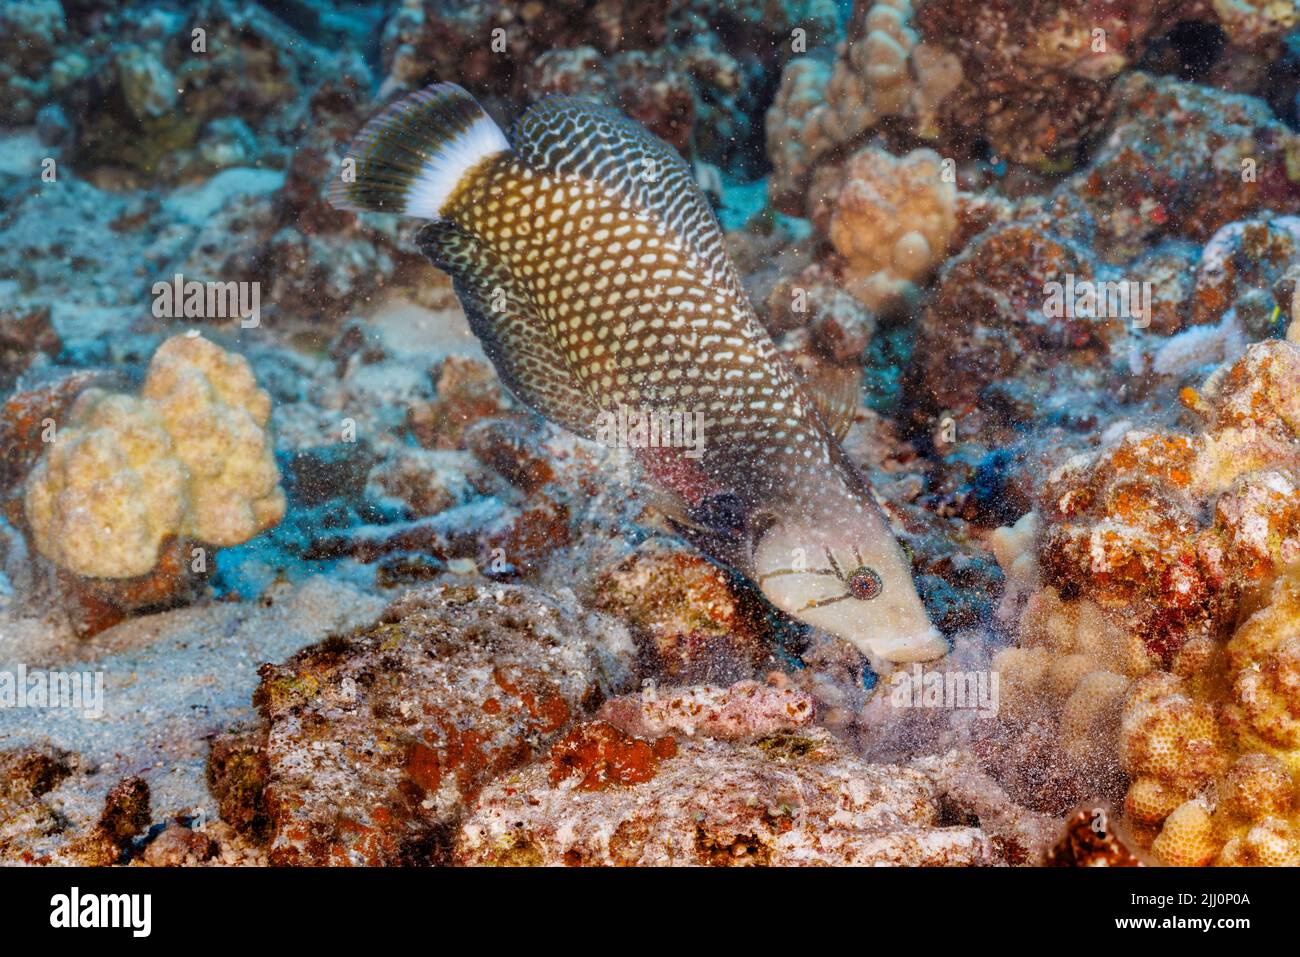 This rockmover wrasse, Novaculichthys taeniourus, is moving a chunk of rubble with its mouth to uncover possible prey underneathe, Hawaii. Stock Photo